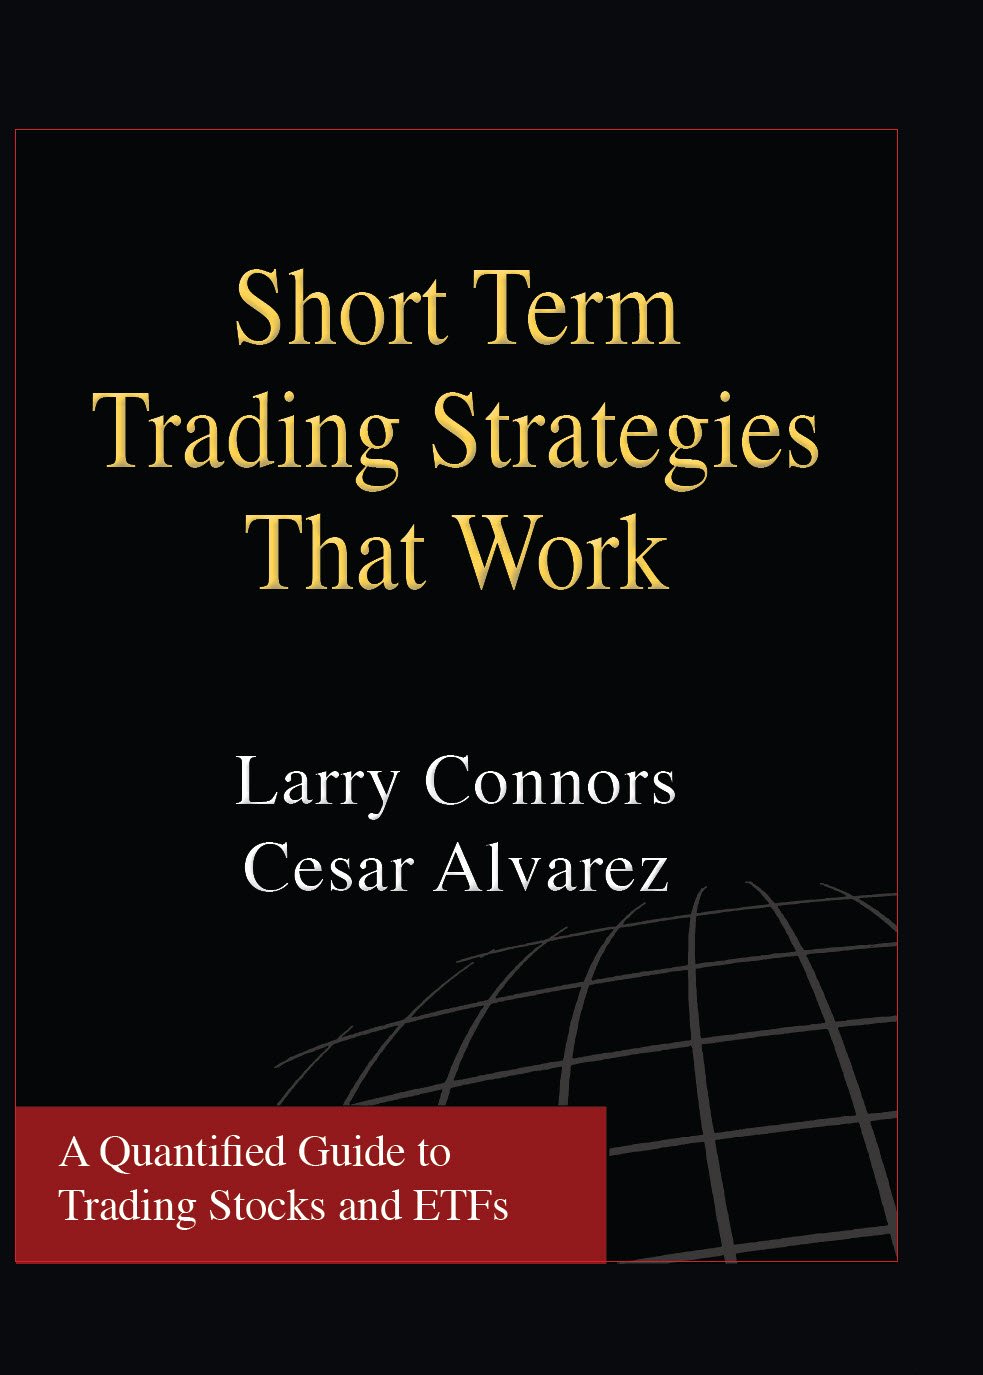 [Laurence A. Connors, Cesar Alvarez] Short Term Trading Strategies That Work